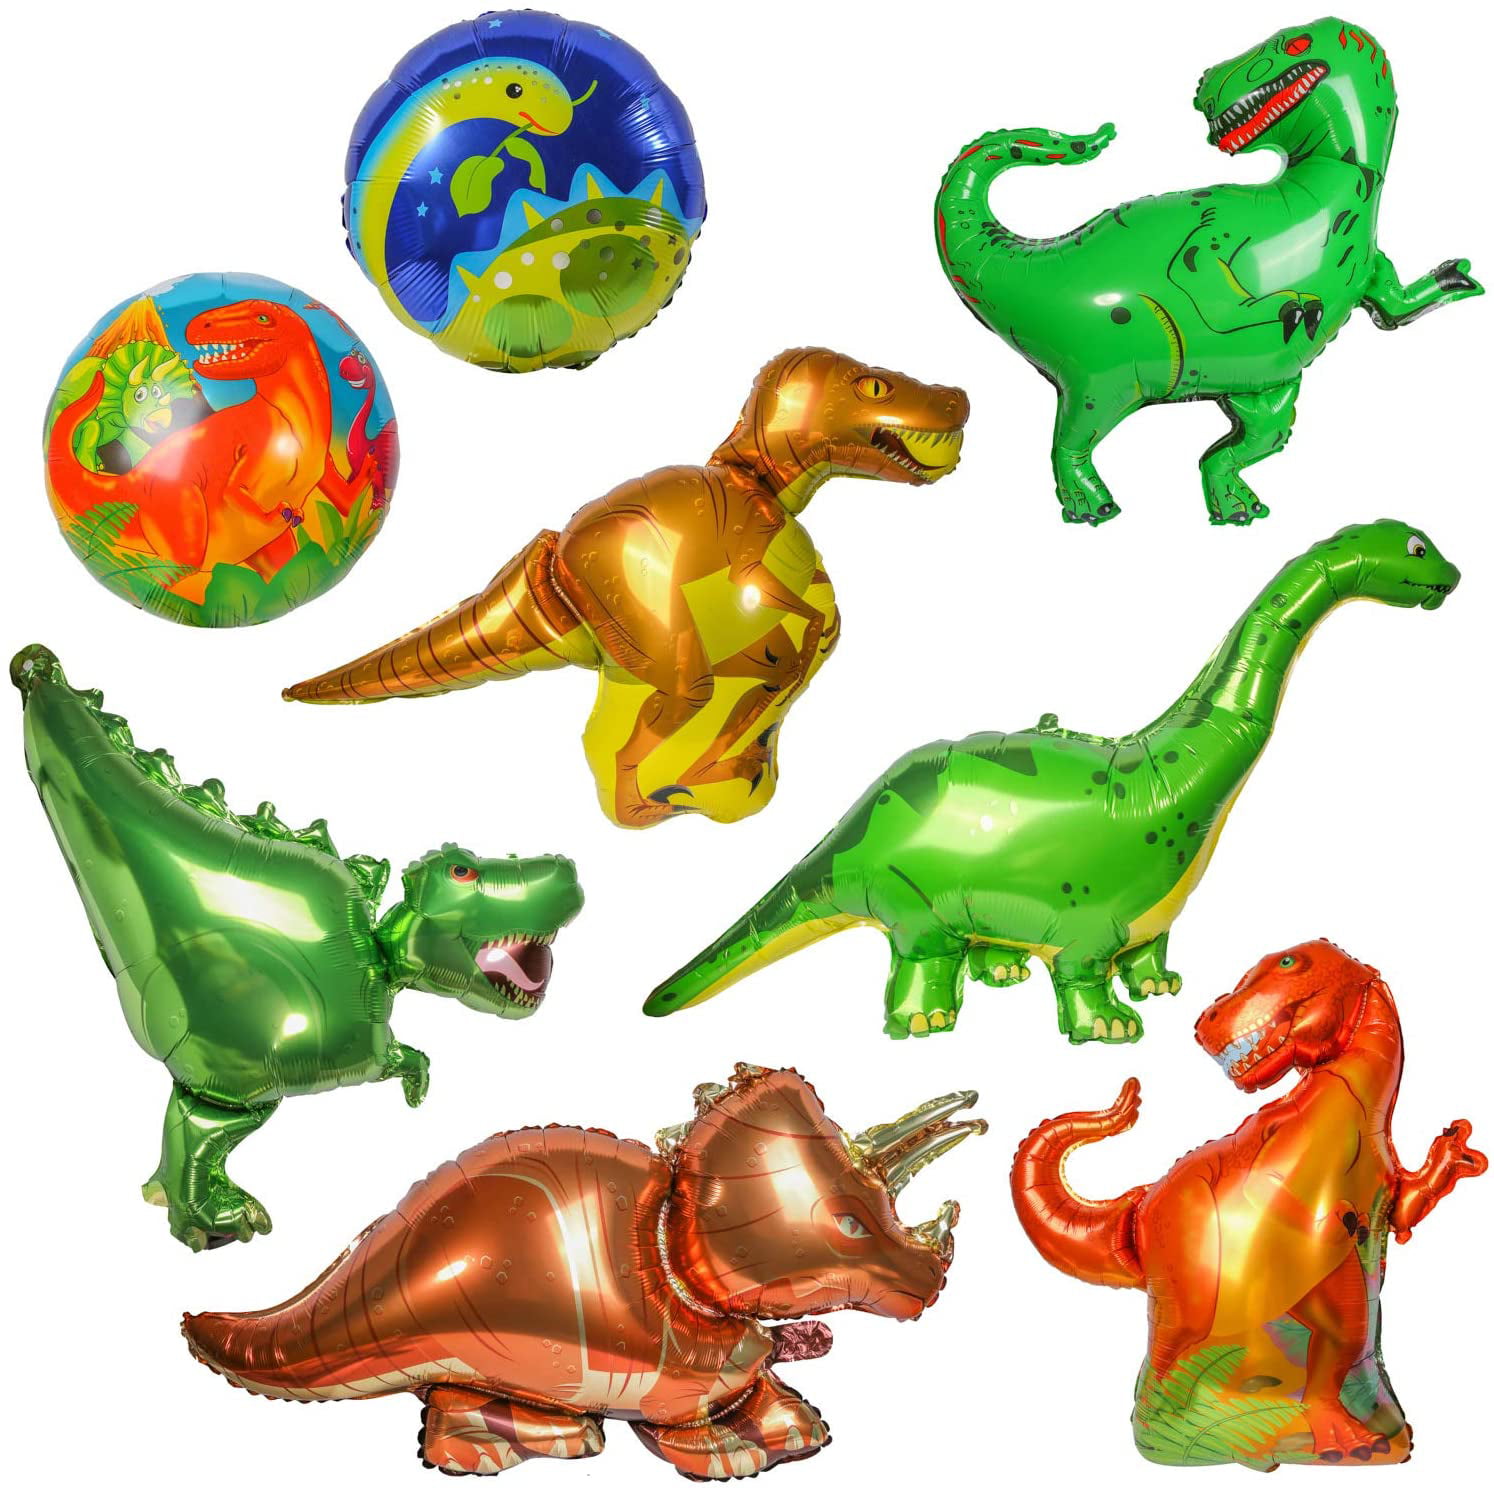 Triceratops T-rex Raptor Allosaurus Dinosaur Balloons 5 Foil Dinosaur Balloons Inflatable Party Supplies and Decorations for Kids foci cozi